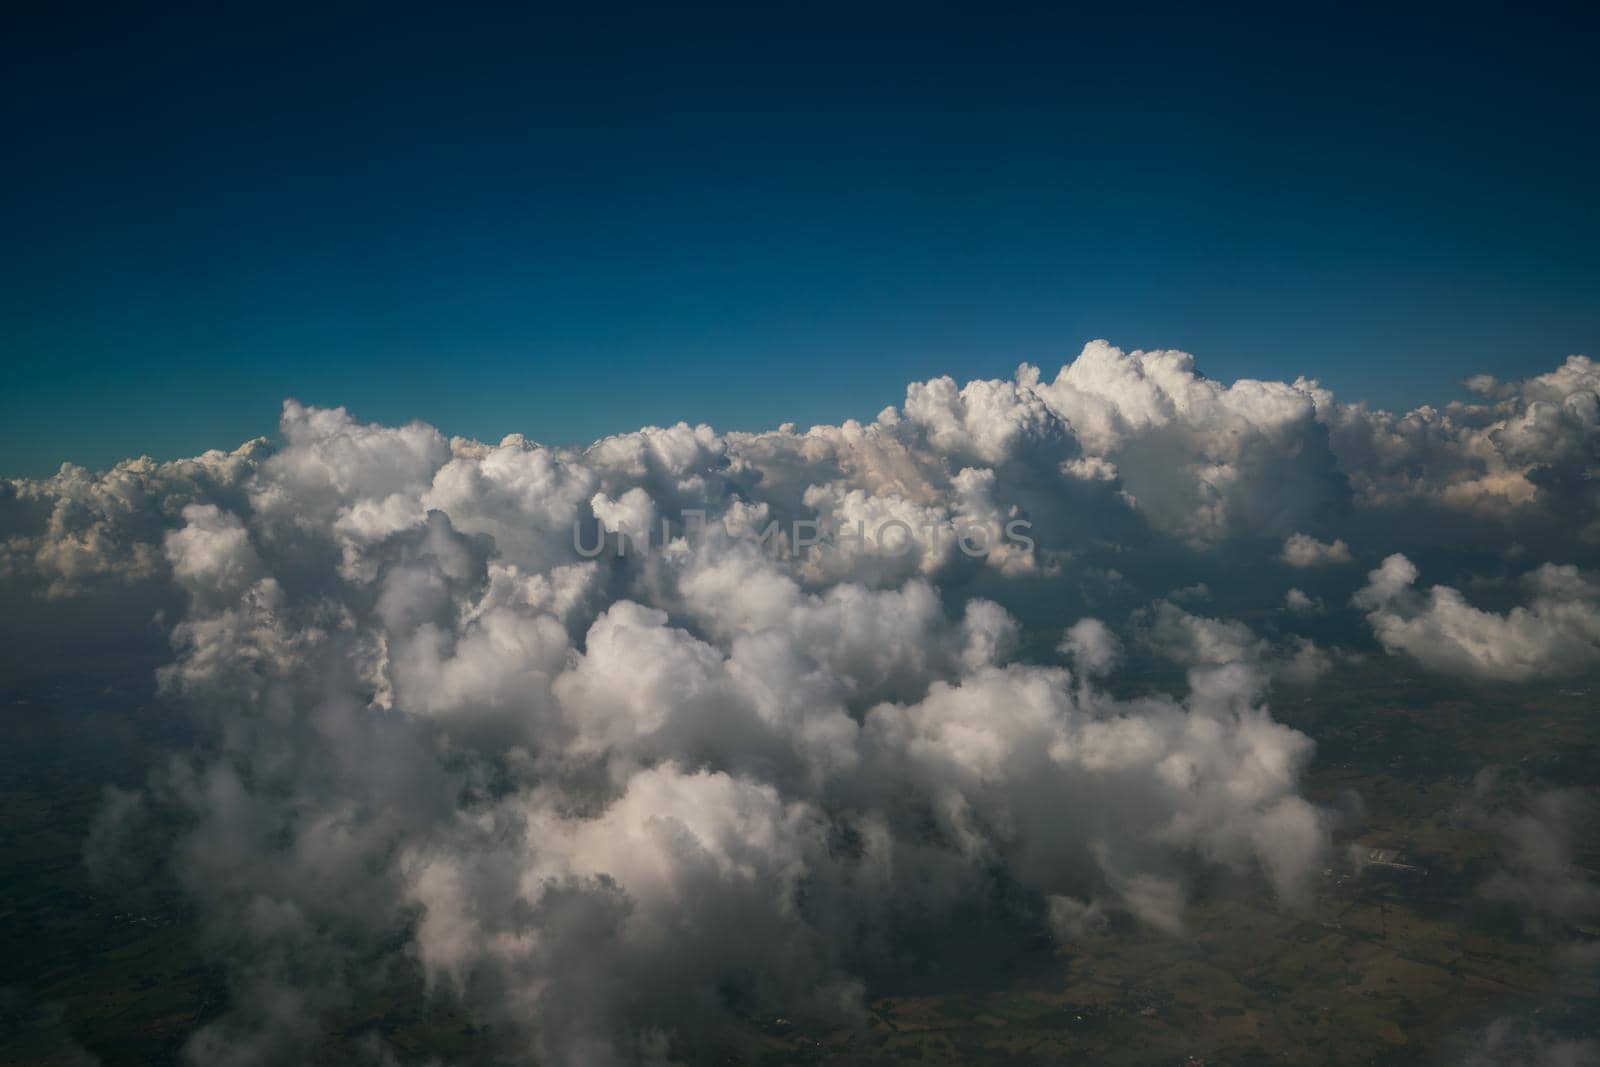 Earth landscape viewed from airplane. Earth surface under the white clouds and blue sky from aerial view. Cloudy weather covering residential land and argriculture land.